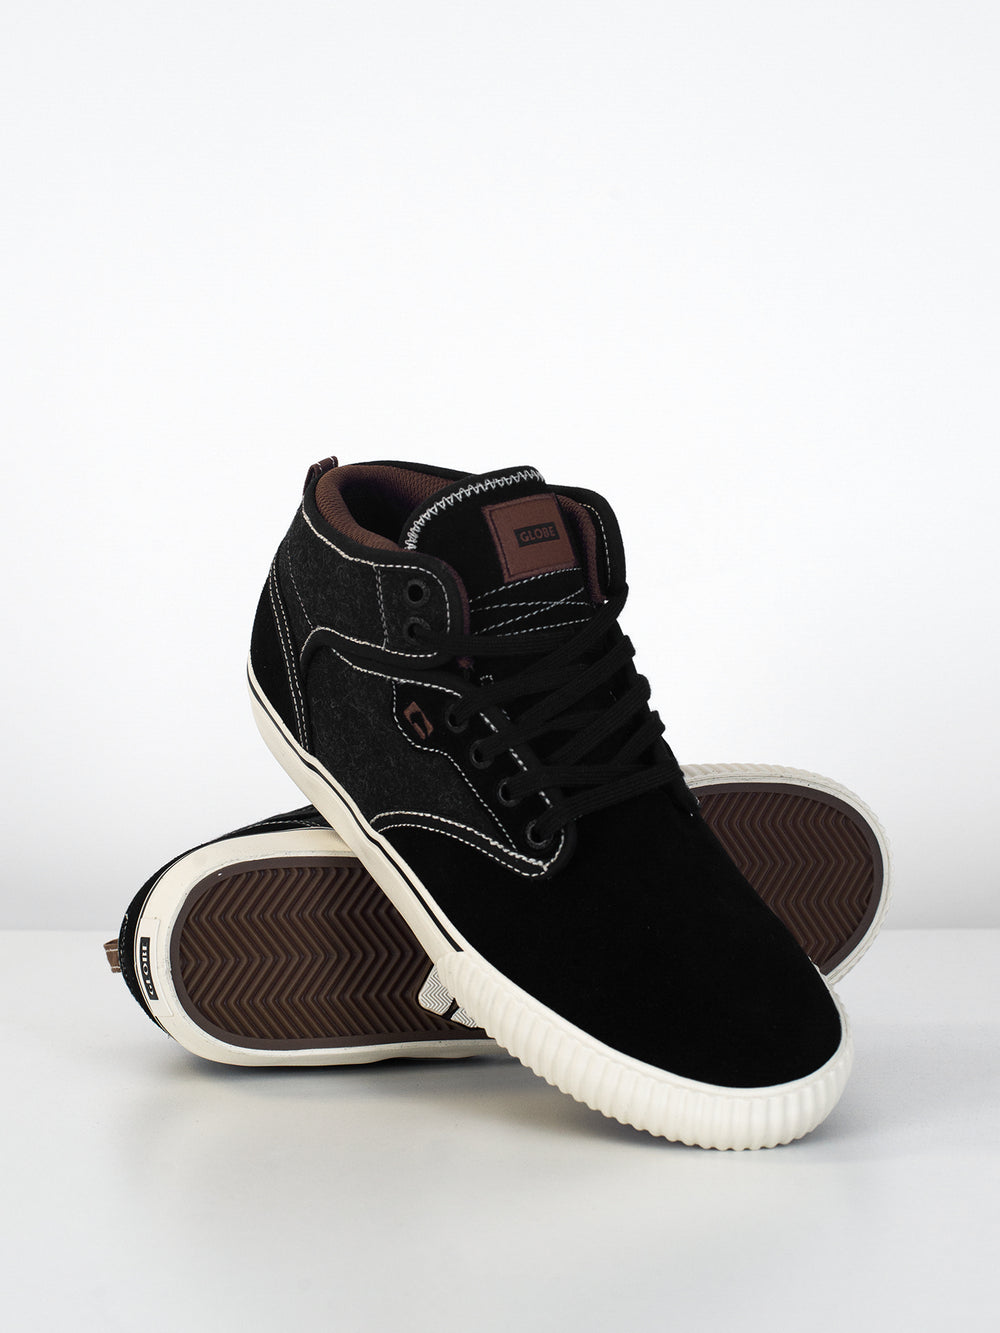 MENS MOTLEY MID SNEAKER - CLEARANCE